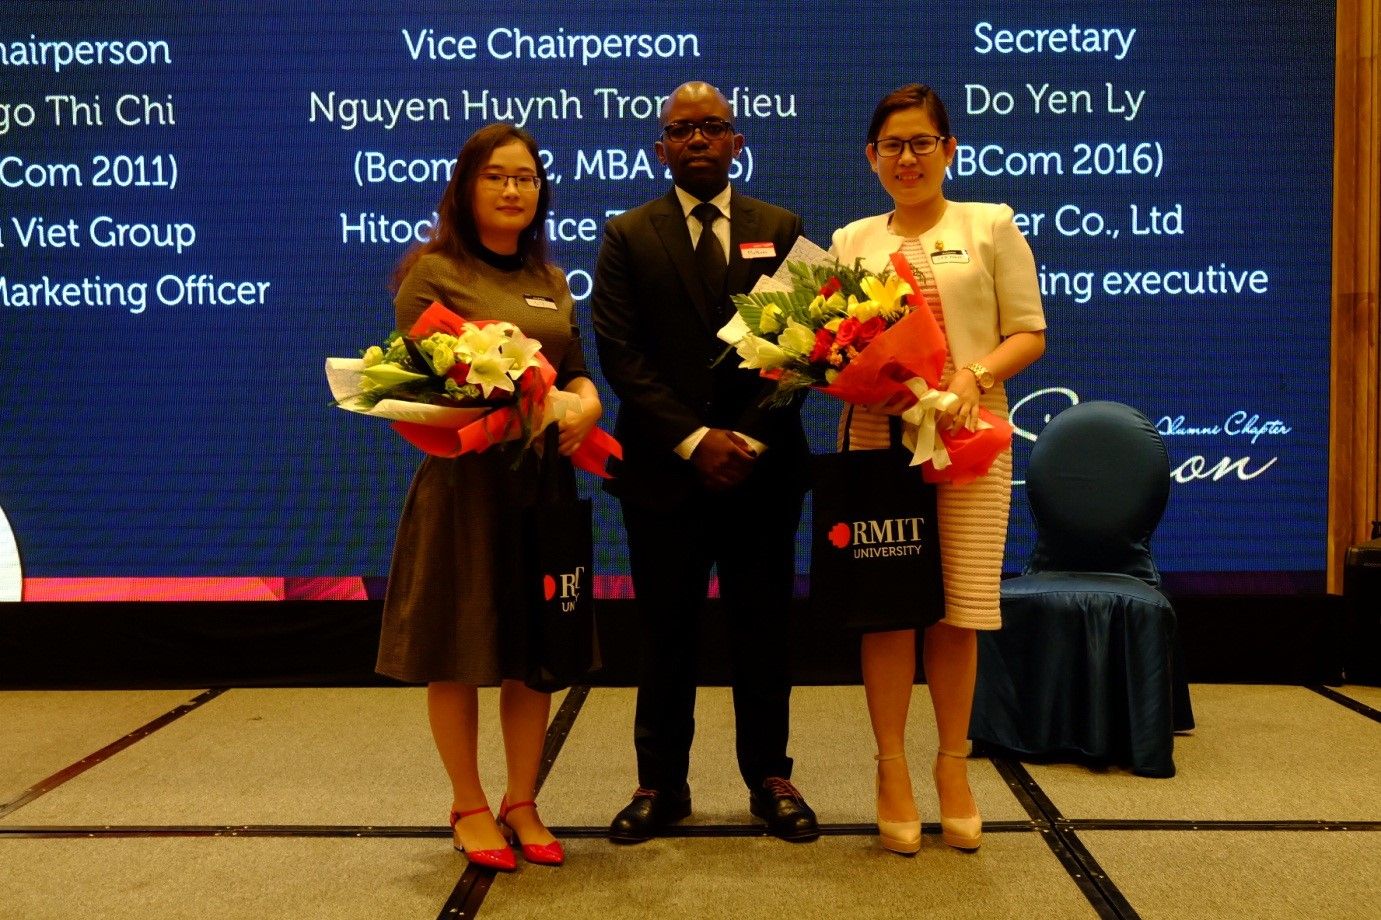 Head of the School of Business & Management Associate Professor Mathews Nkhoma (centre) formally welcomed two members of the Business Alumni executive board: Chairperson Ngo Thi Chi (right) and Secretary Do Yen Ly.